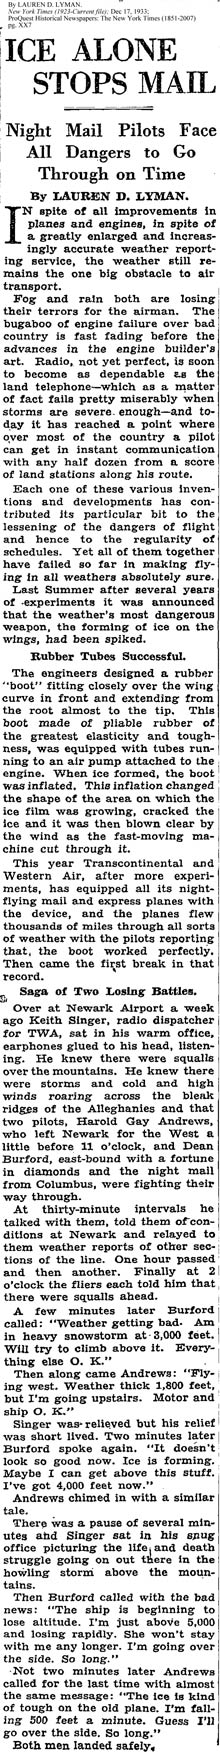 The New York Times, December 17, 1933 (Source: NYT via Woodling)